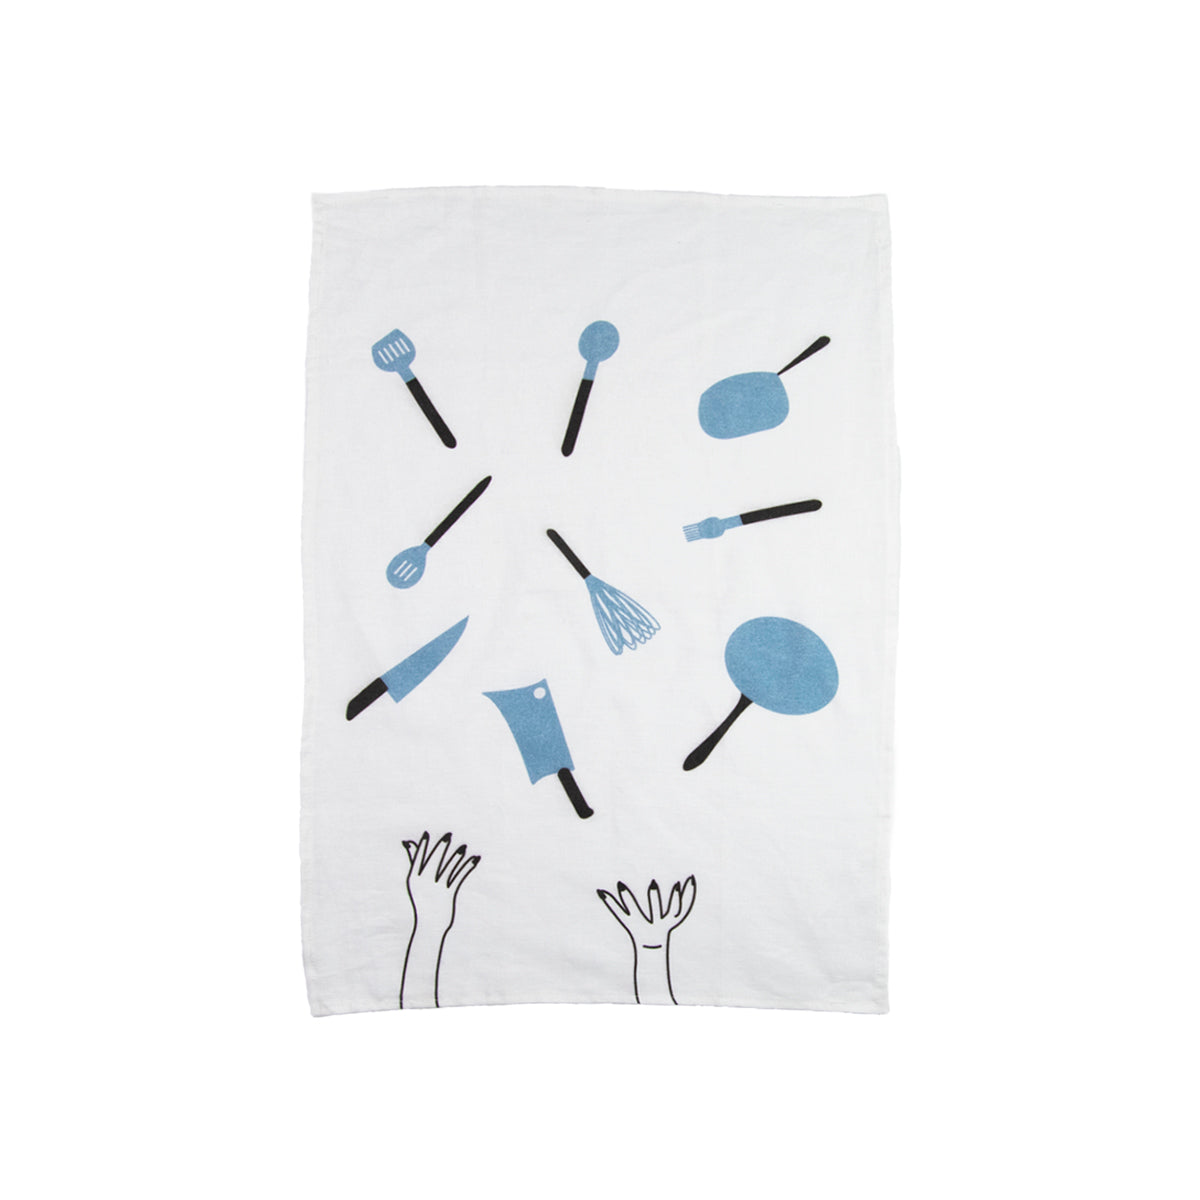 16" x 24" 100% linen tea towel featuring illustrations of various kitchen utensils and two hands tossing them into the air